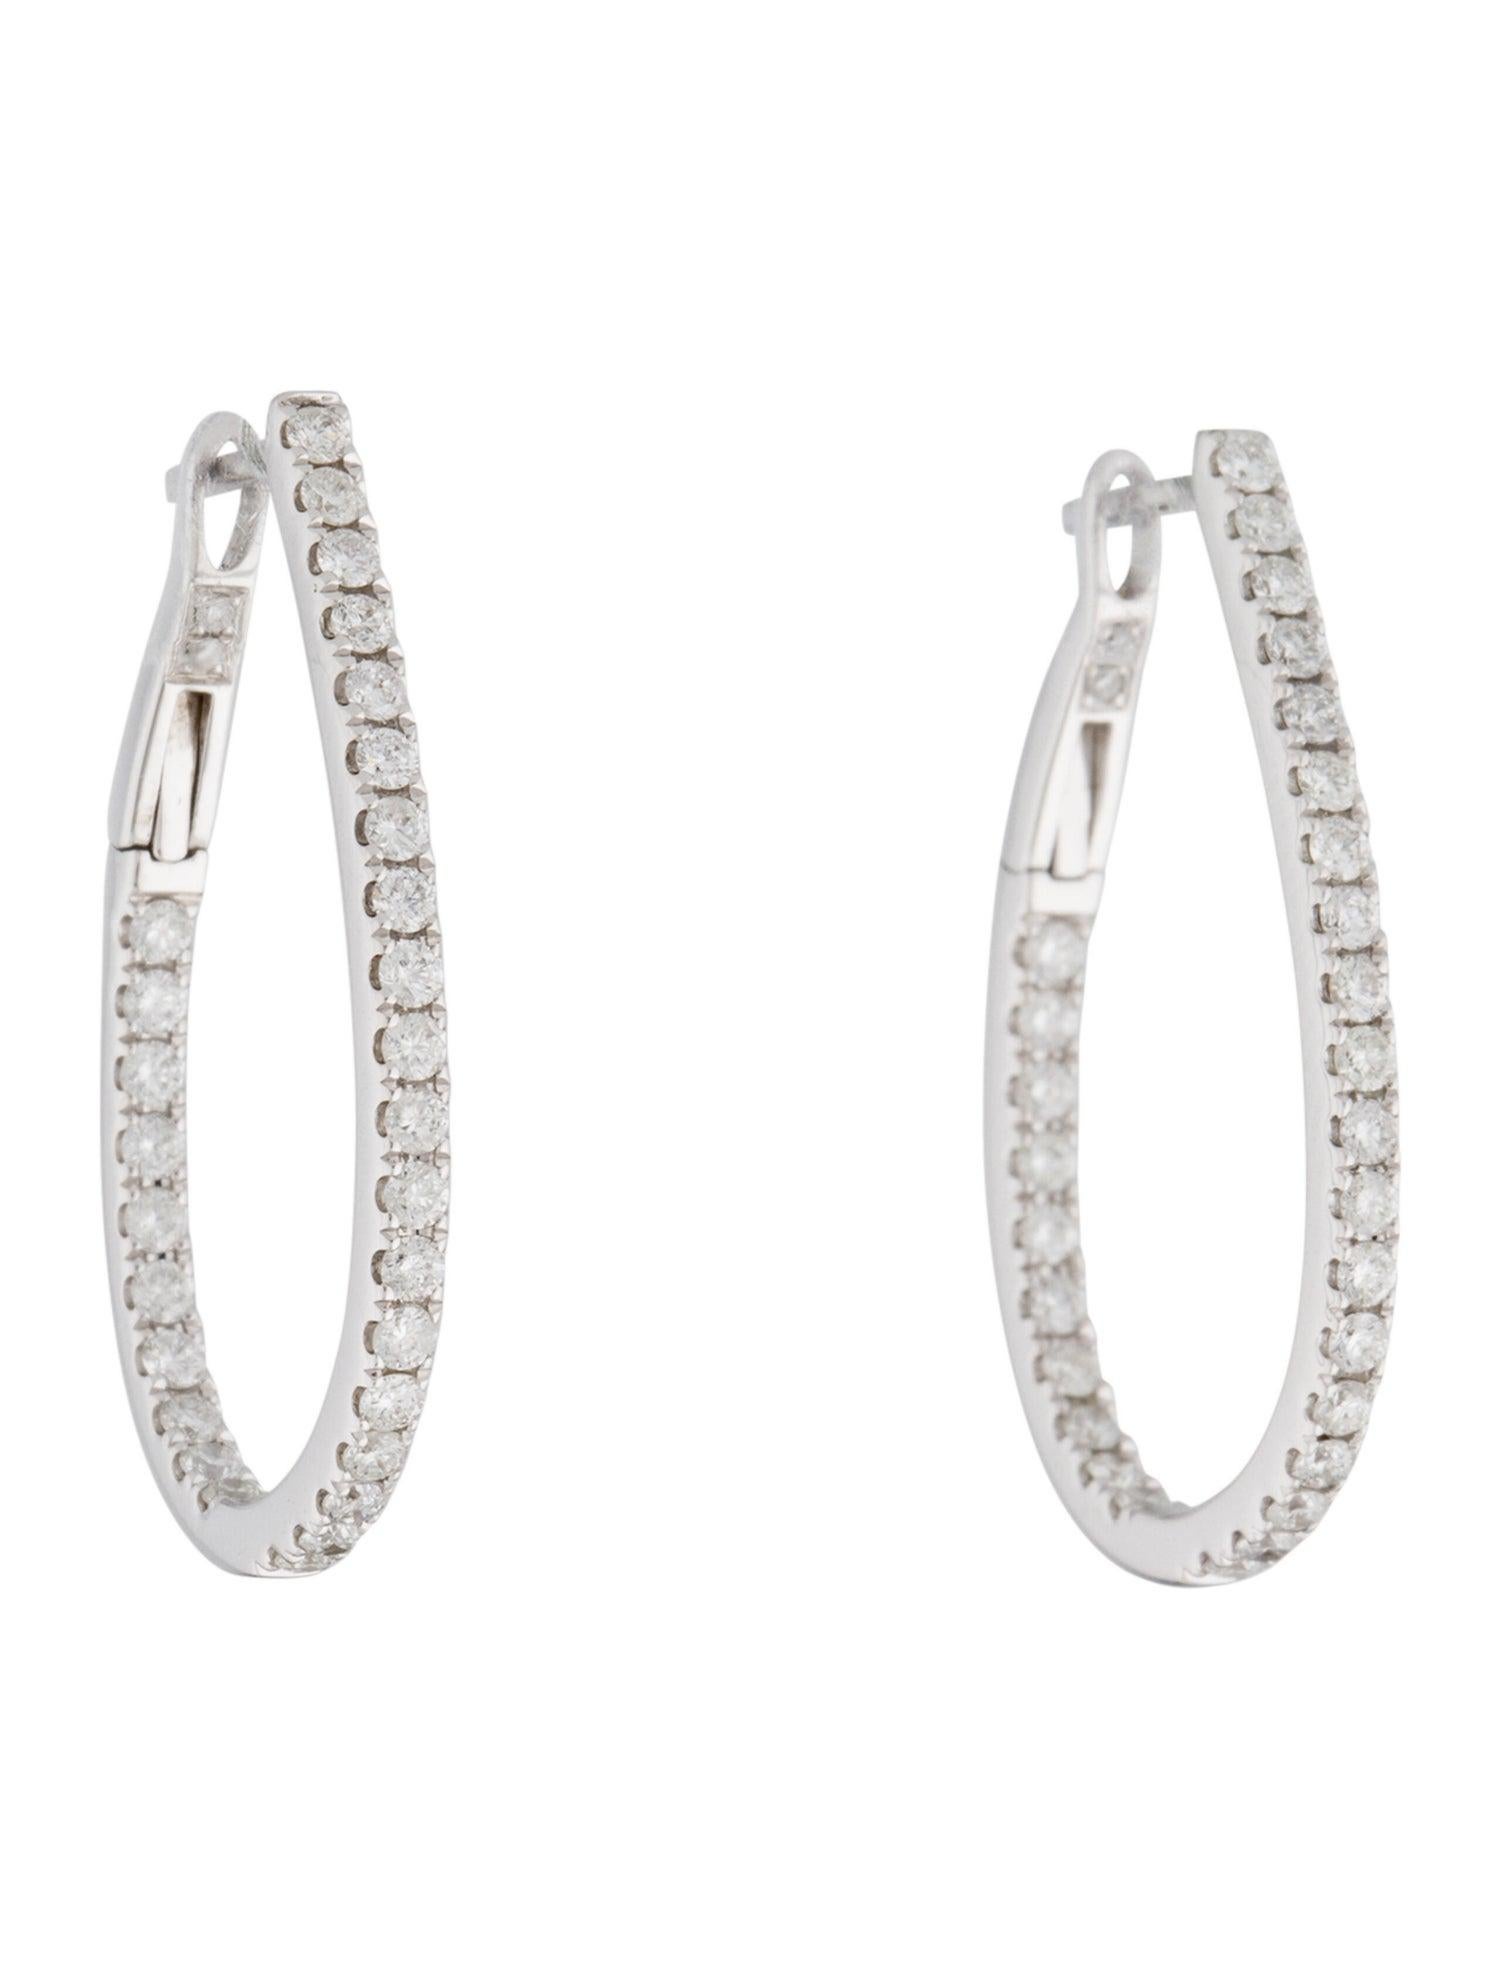 Quality Diamond Hoops: Made from real 14k gold and 62 glittering natural white approximately 0.90 ct. Certified diamonds, featuring a single row of white diamonds on the inside and outside of the earrings with a color and clarity of GH-SI. Earring